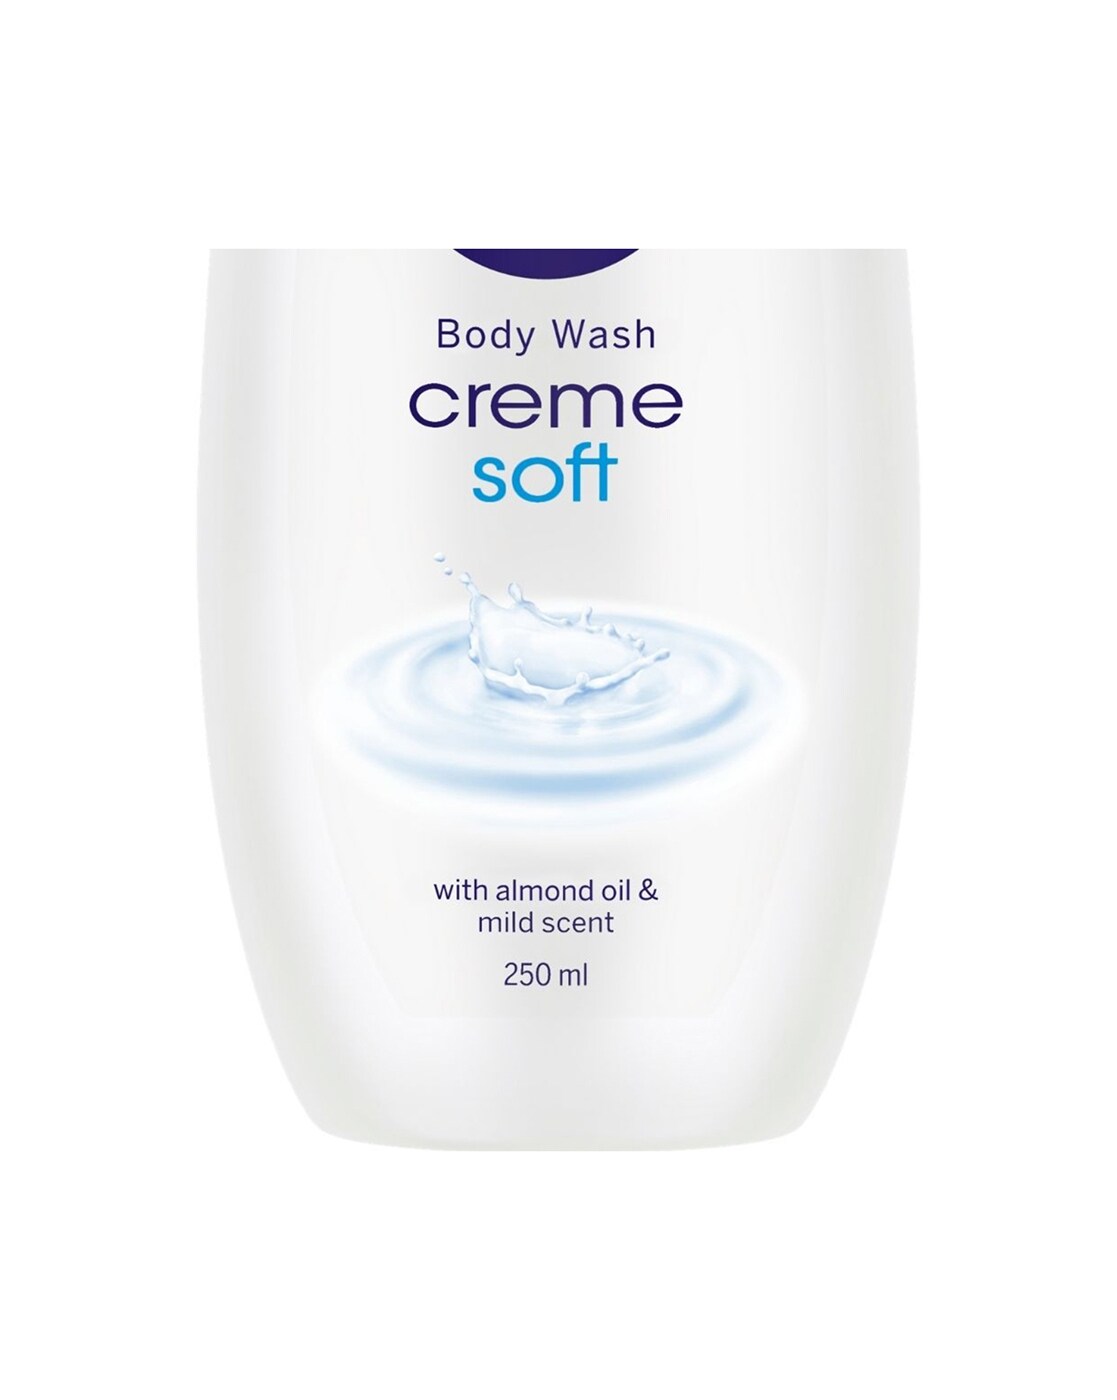 NIVEA Creme Soft Body Wash for Women with Almond Oil, Body Cleanser